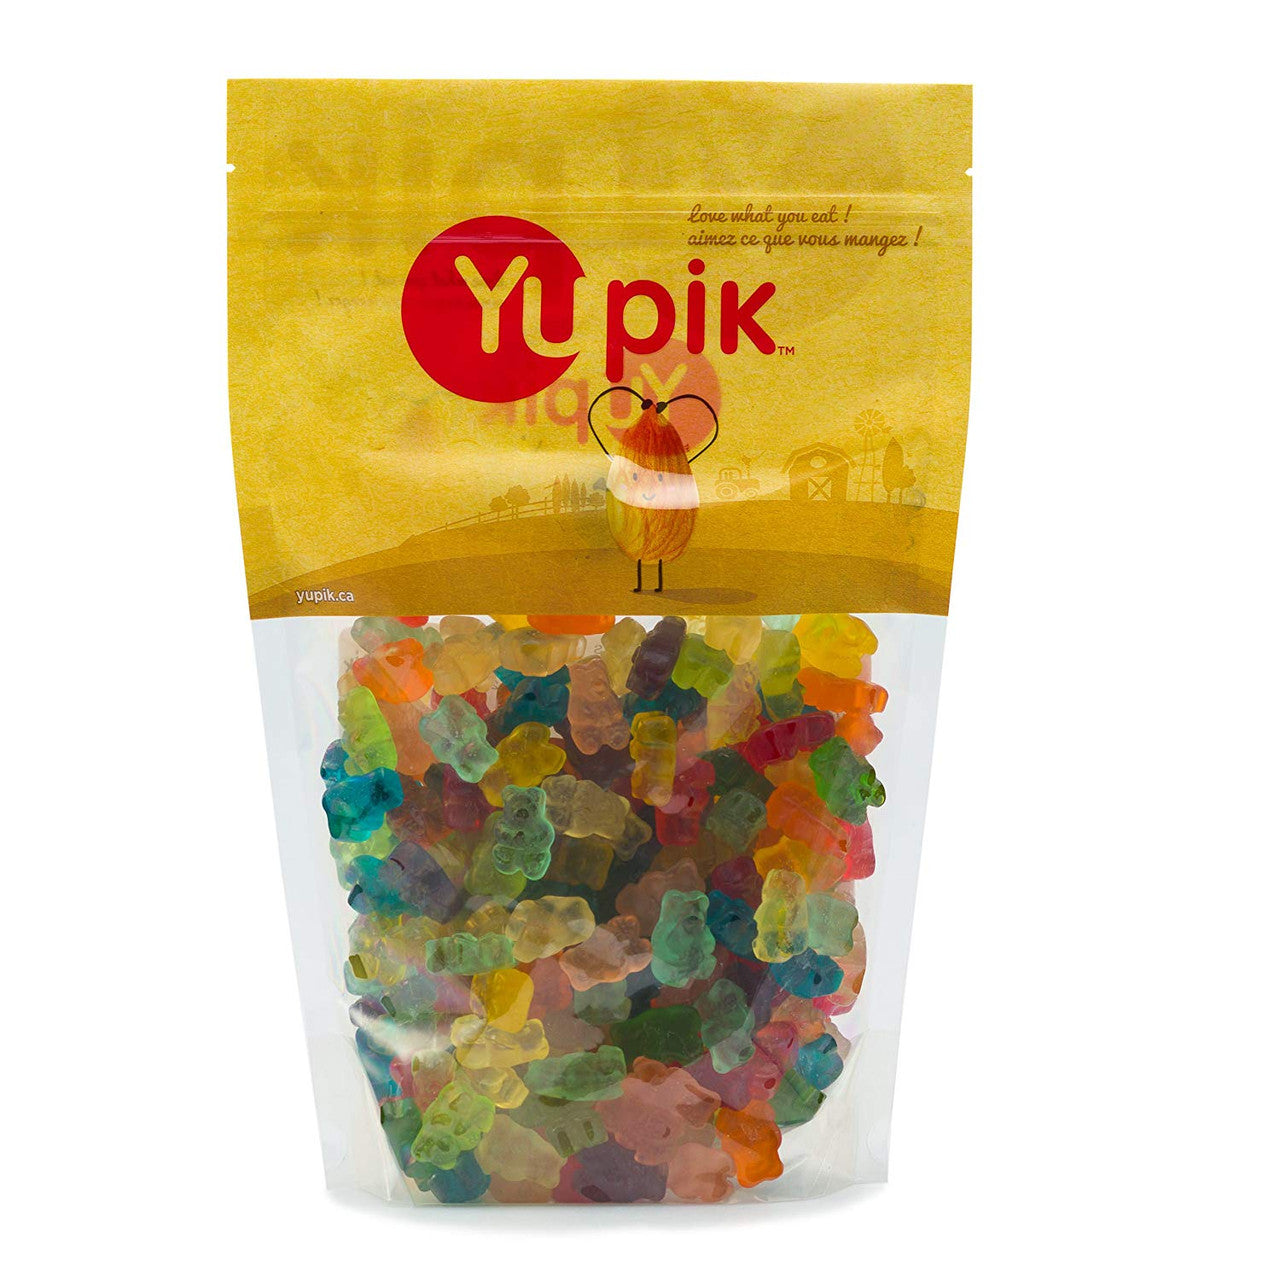 Yupik Gummy Bears 12 Flavors, 1kg/2.2 lbs.., (Imported from Canada)